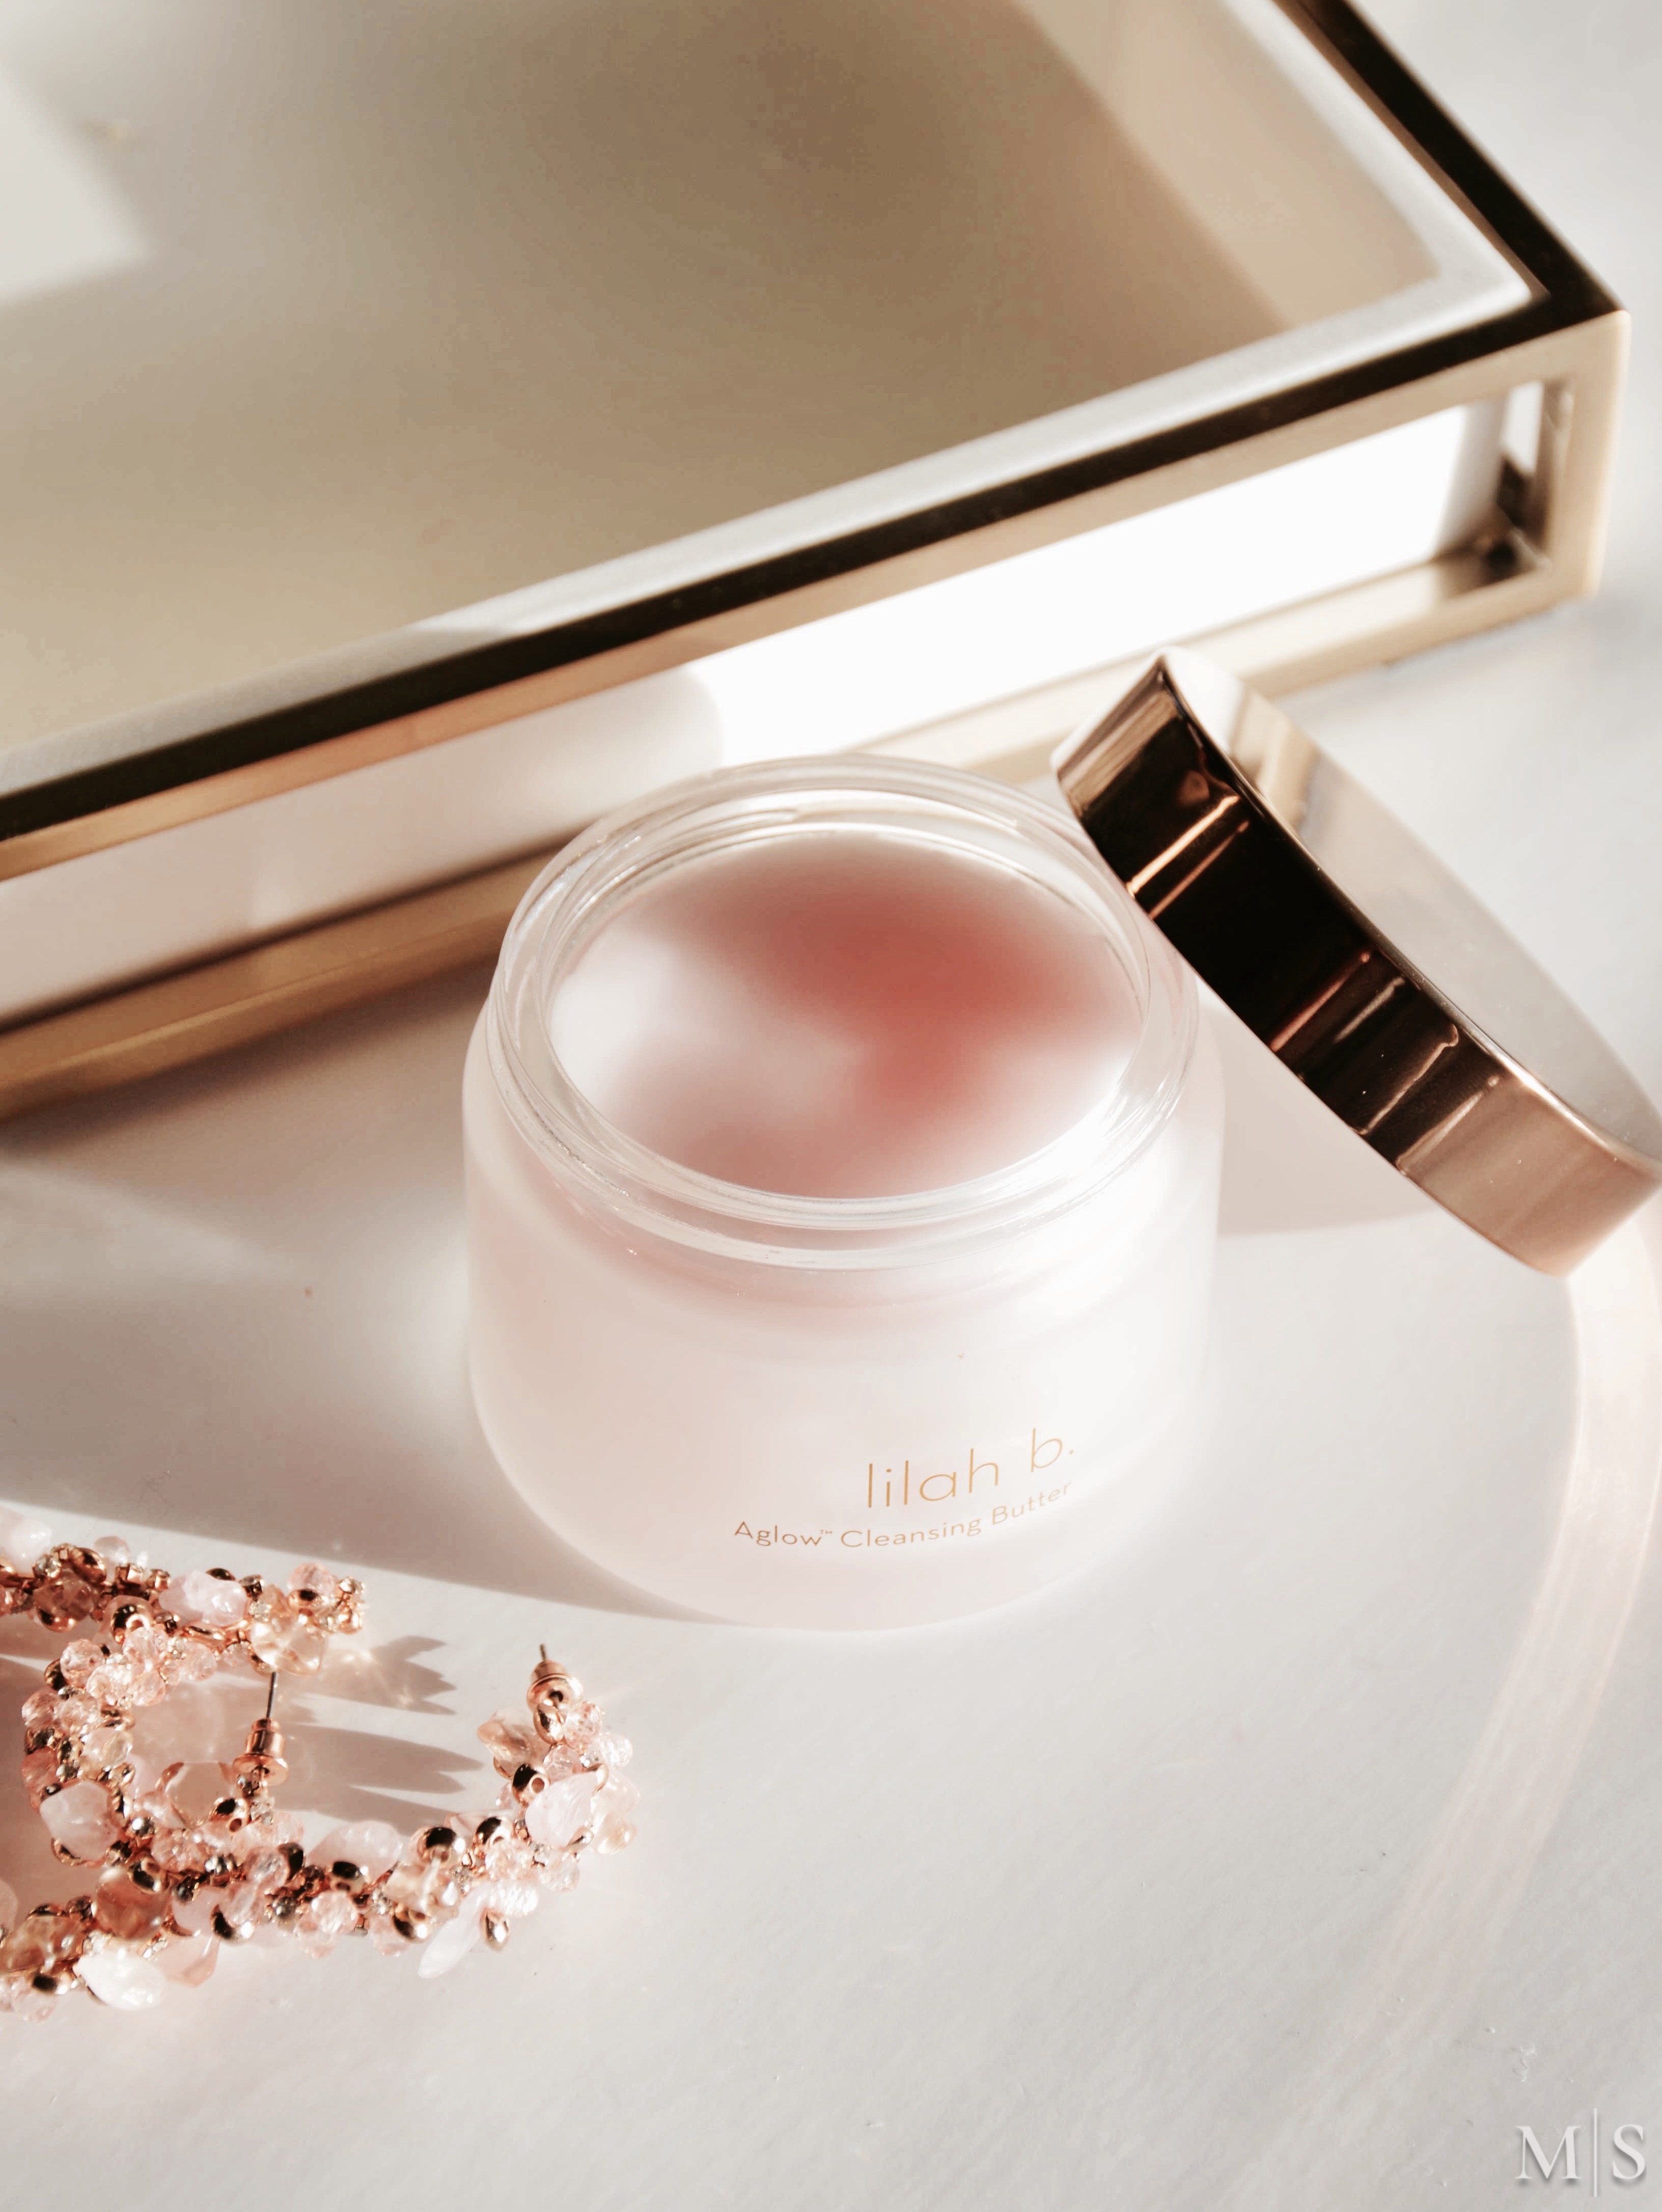 Lilah b. Aglow Cleansing Butter